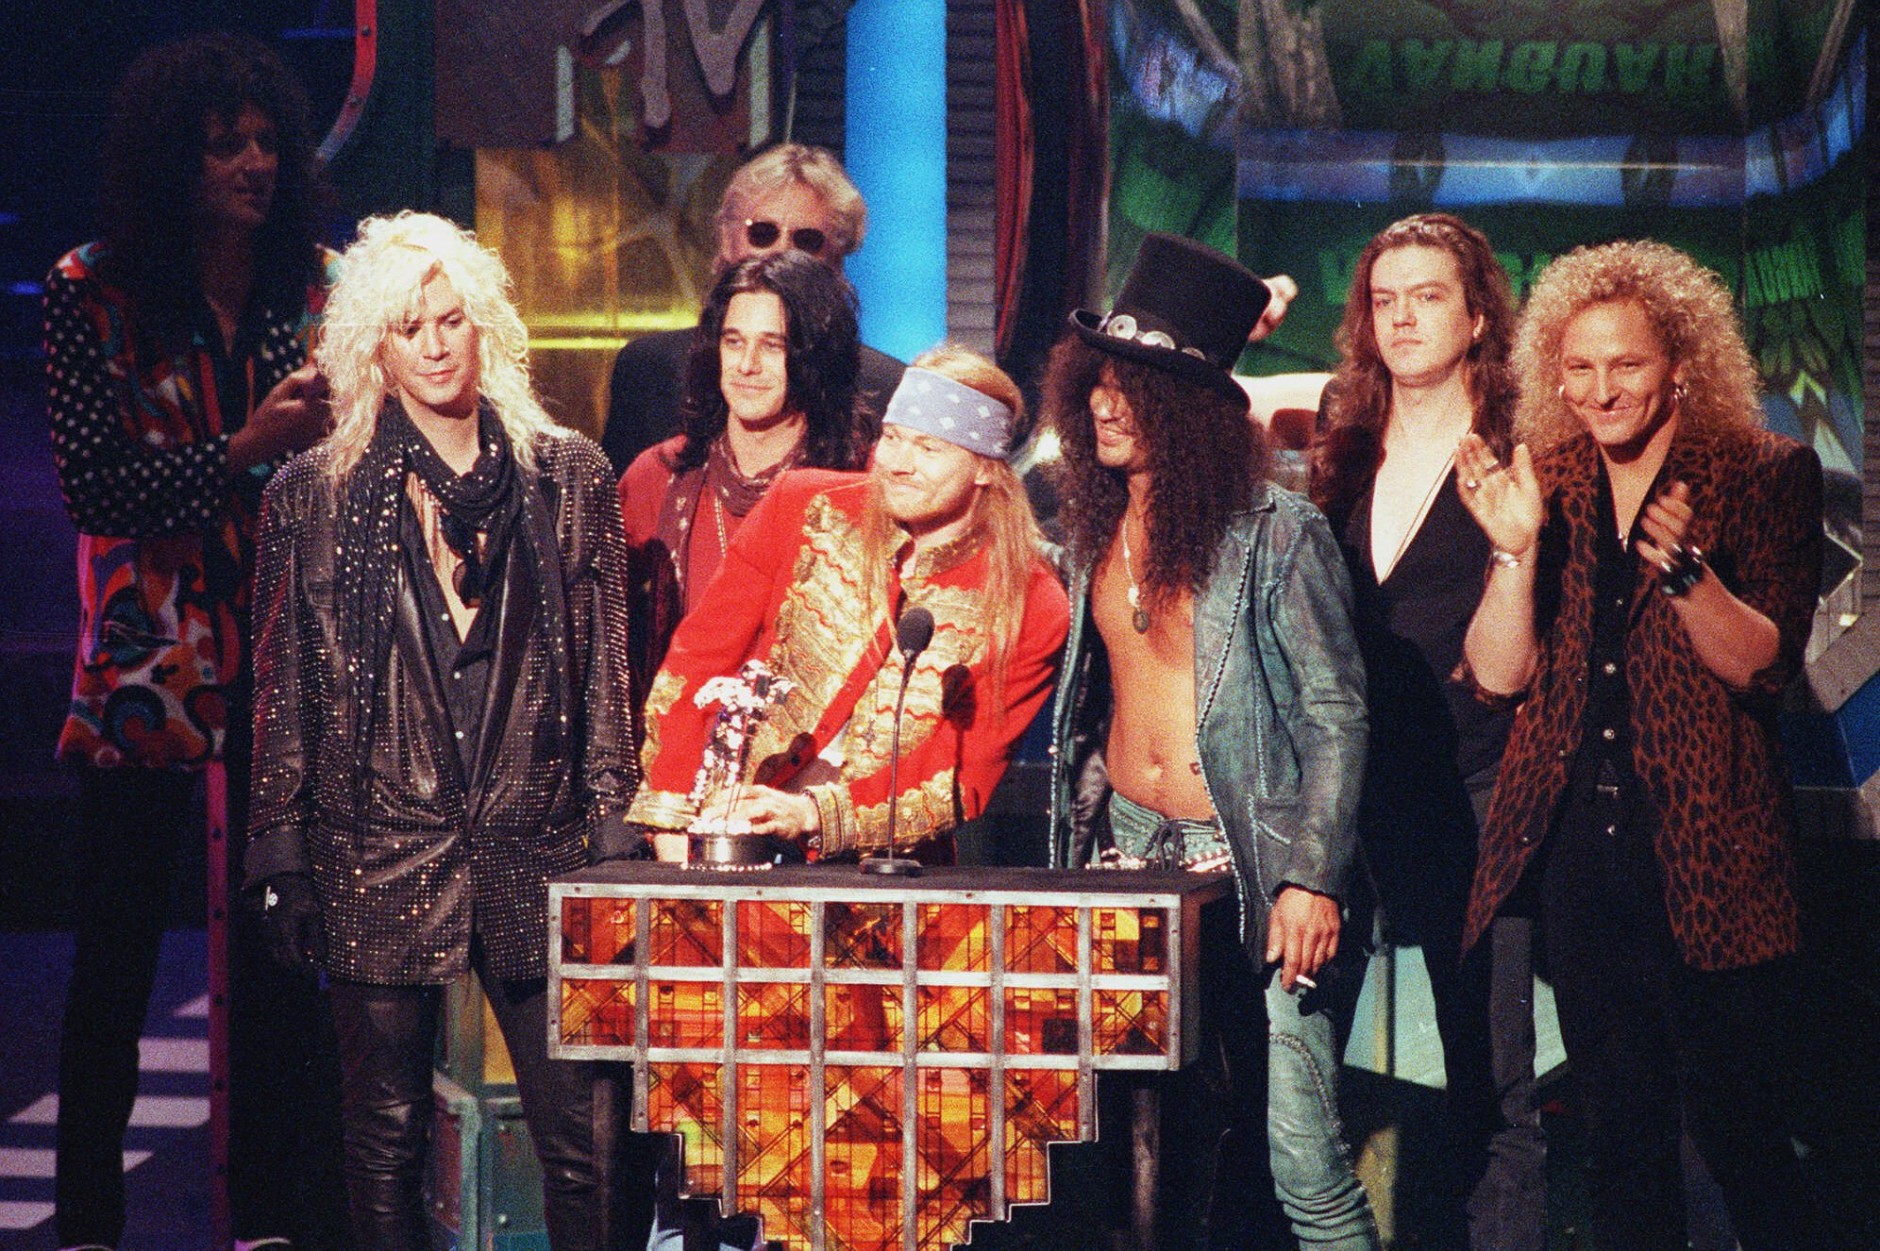 Guns N' Roses celebrate their Michael Jackson Video Vanguard Award for "November Rain" at the MTV Video Music ceremony Sept. 10, 1992 in Los Angeles.  At the podium are Axl Rose, left, Slash.  With them are Duff McKagan, at left with blond hair, and Gilby Clarke, Dizzy Reed, and Matt Sorum.  (AP Photo/Kevork Djansezian)